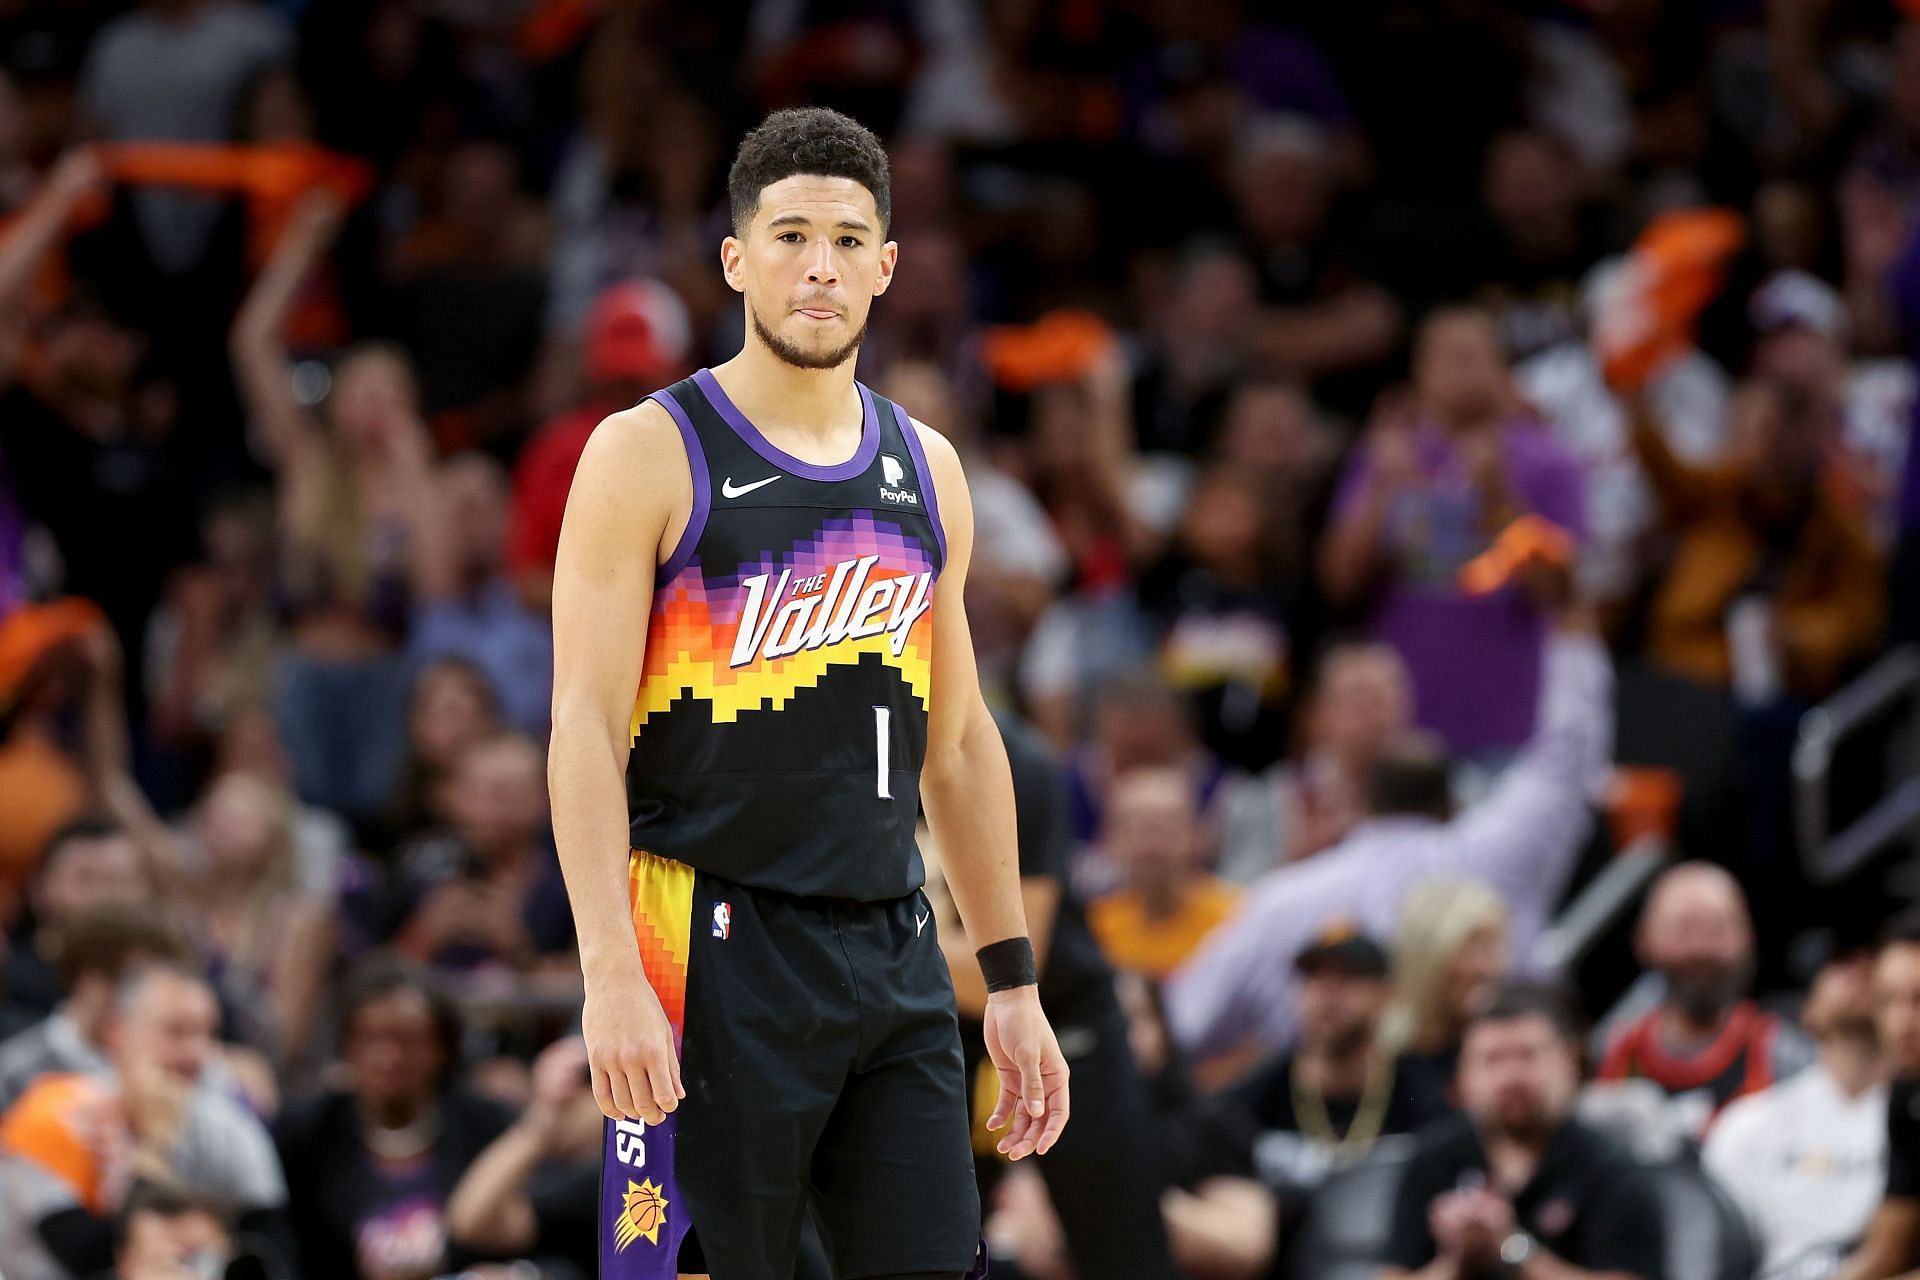 Phoenix Suns star Devin Booker scored 31 points in the first half of Game 2 against the New Orleans Pelicans